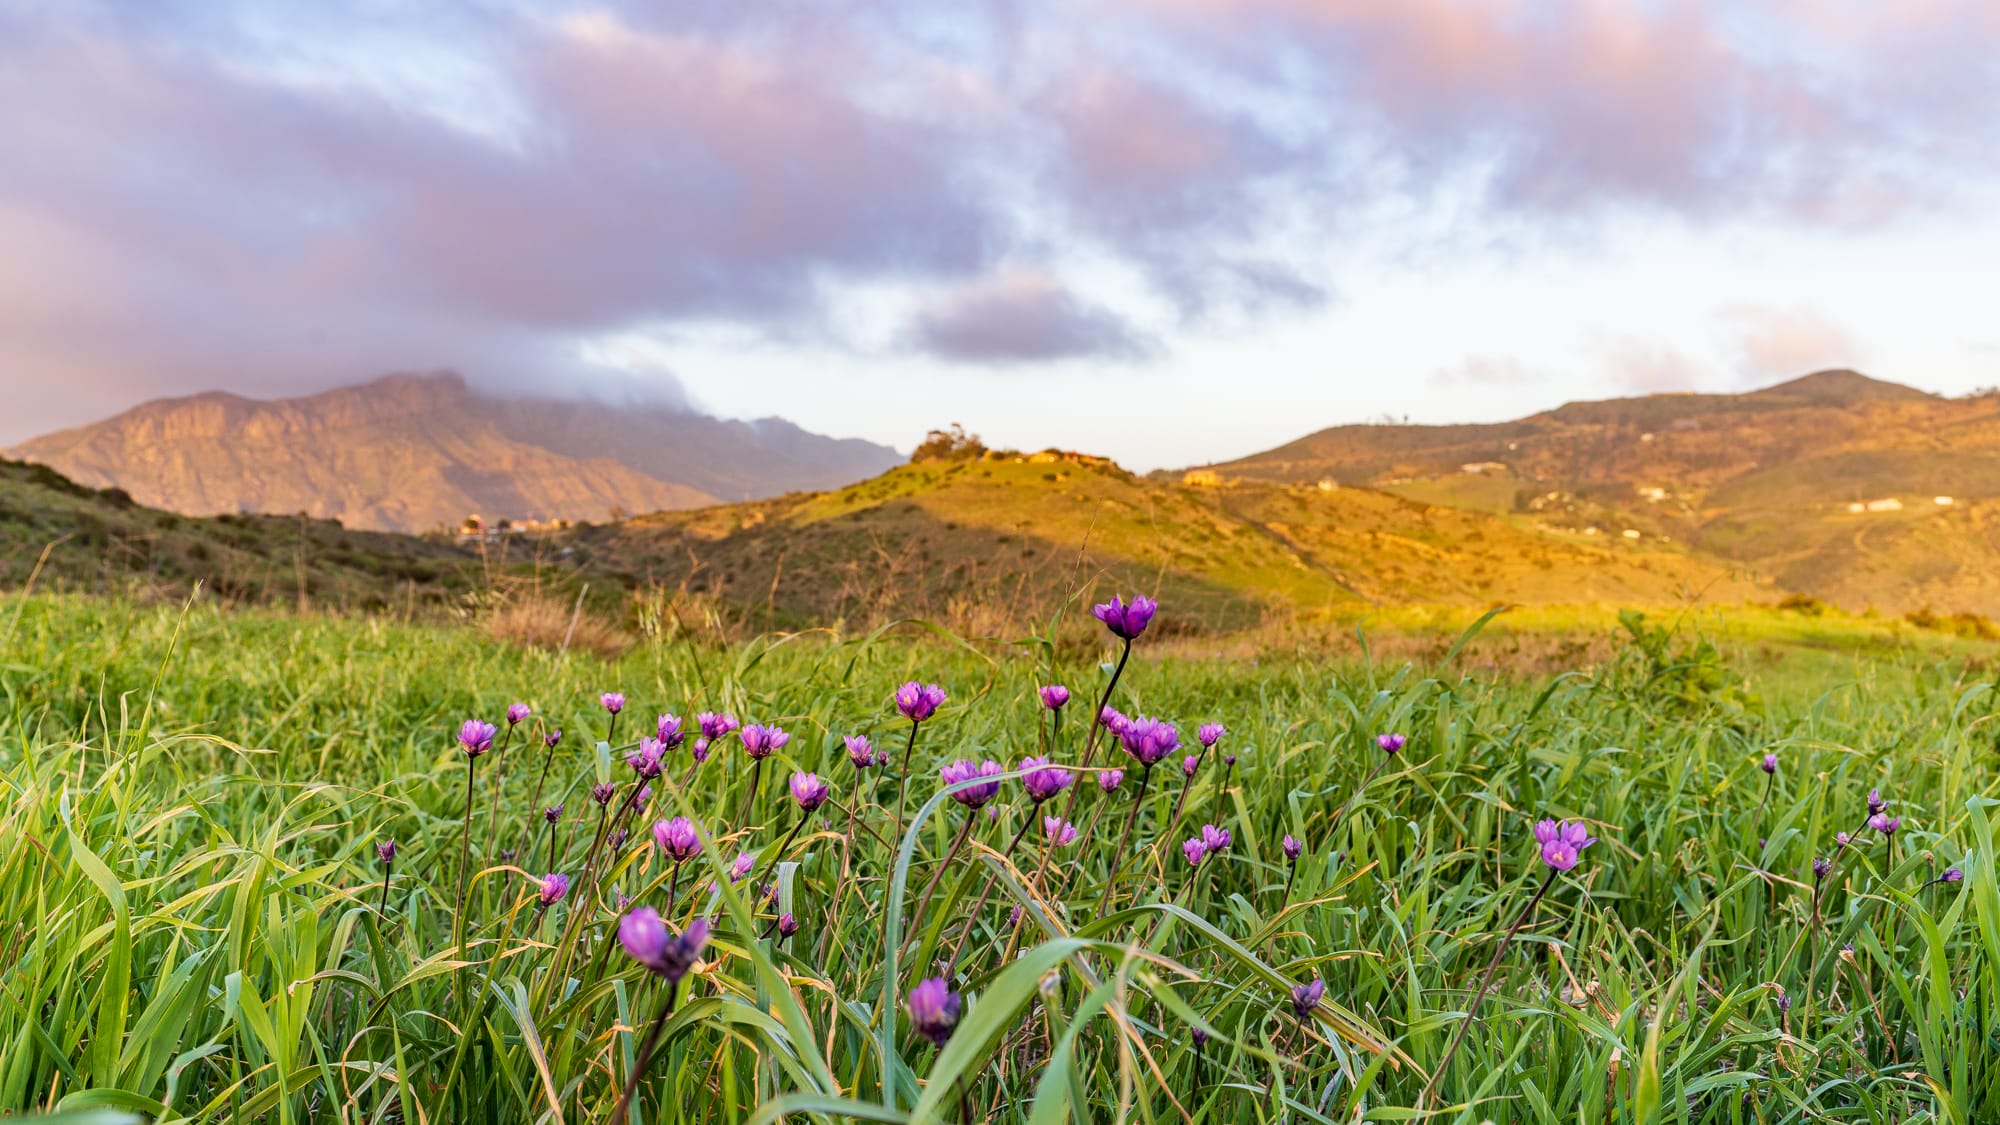 Purple flowers in a grassy field with mountains in the background.